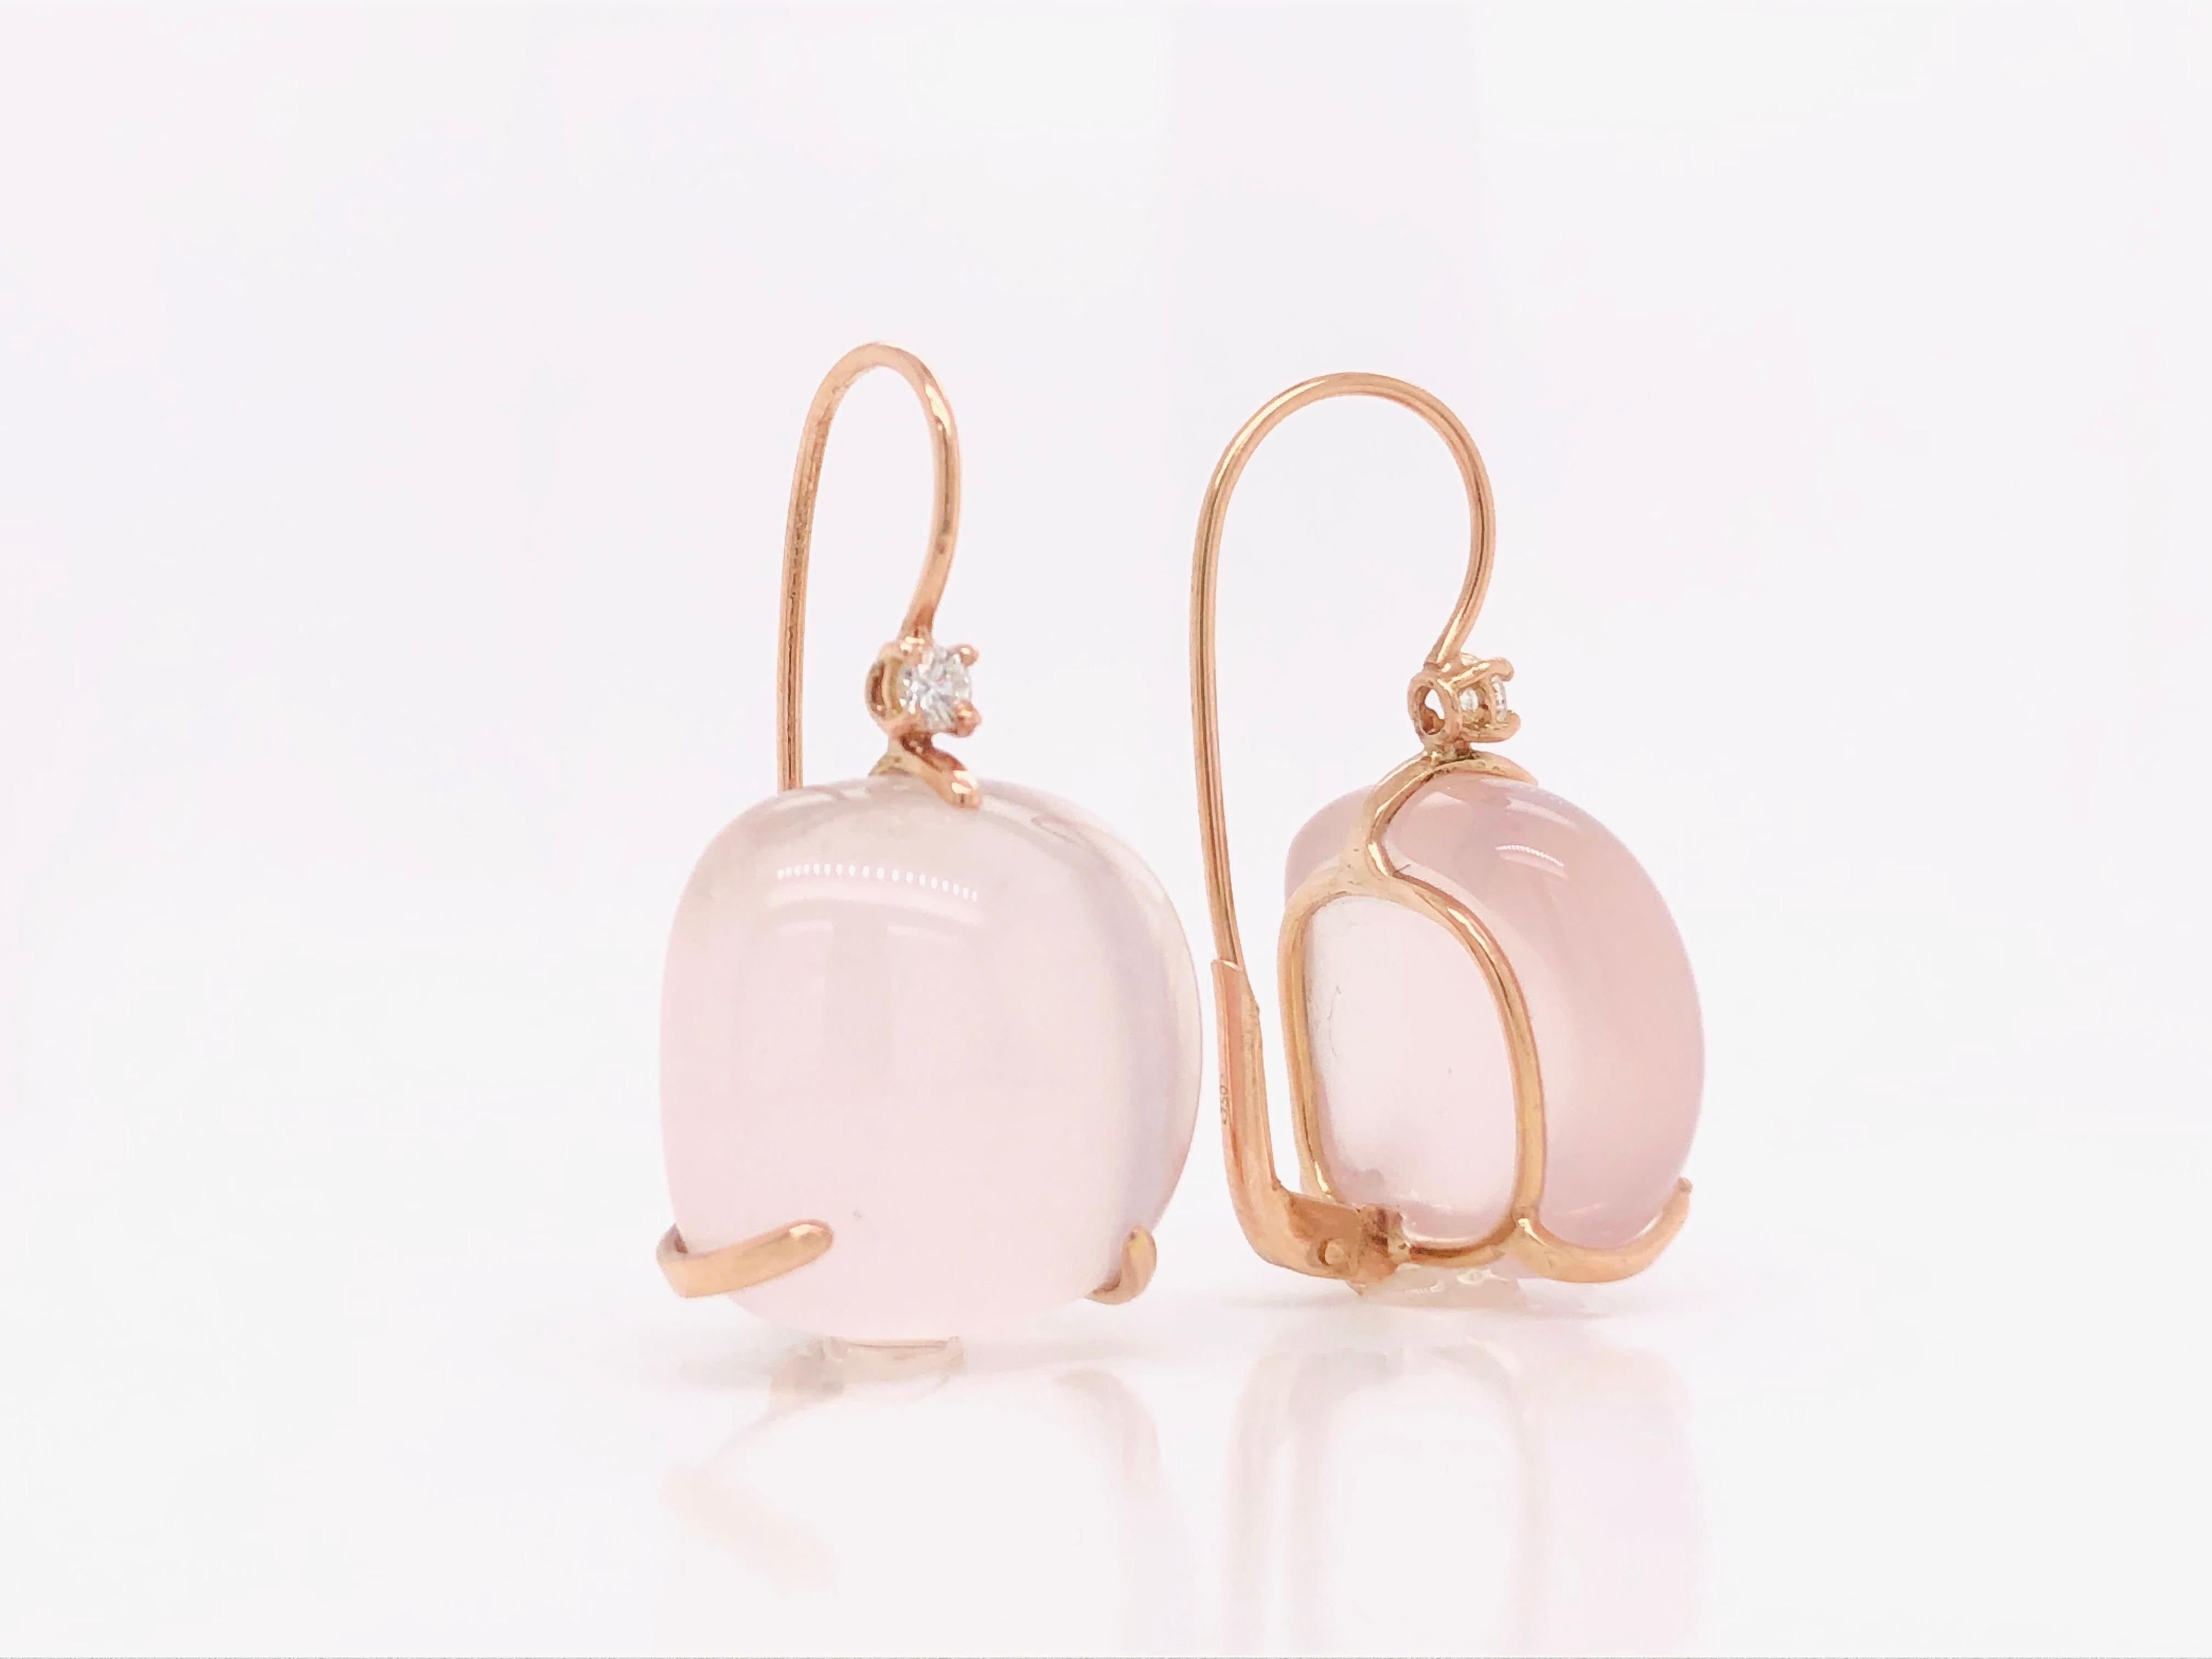 Rose Quartz Earrings with Diamonds on 18K Rose Gold are the epitome of elegance and femininity. Featuring two magnificent pink quartz stones and two sparkling diamonds, each weighing 0.14 carats, these earrings are the perfect choice for those